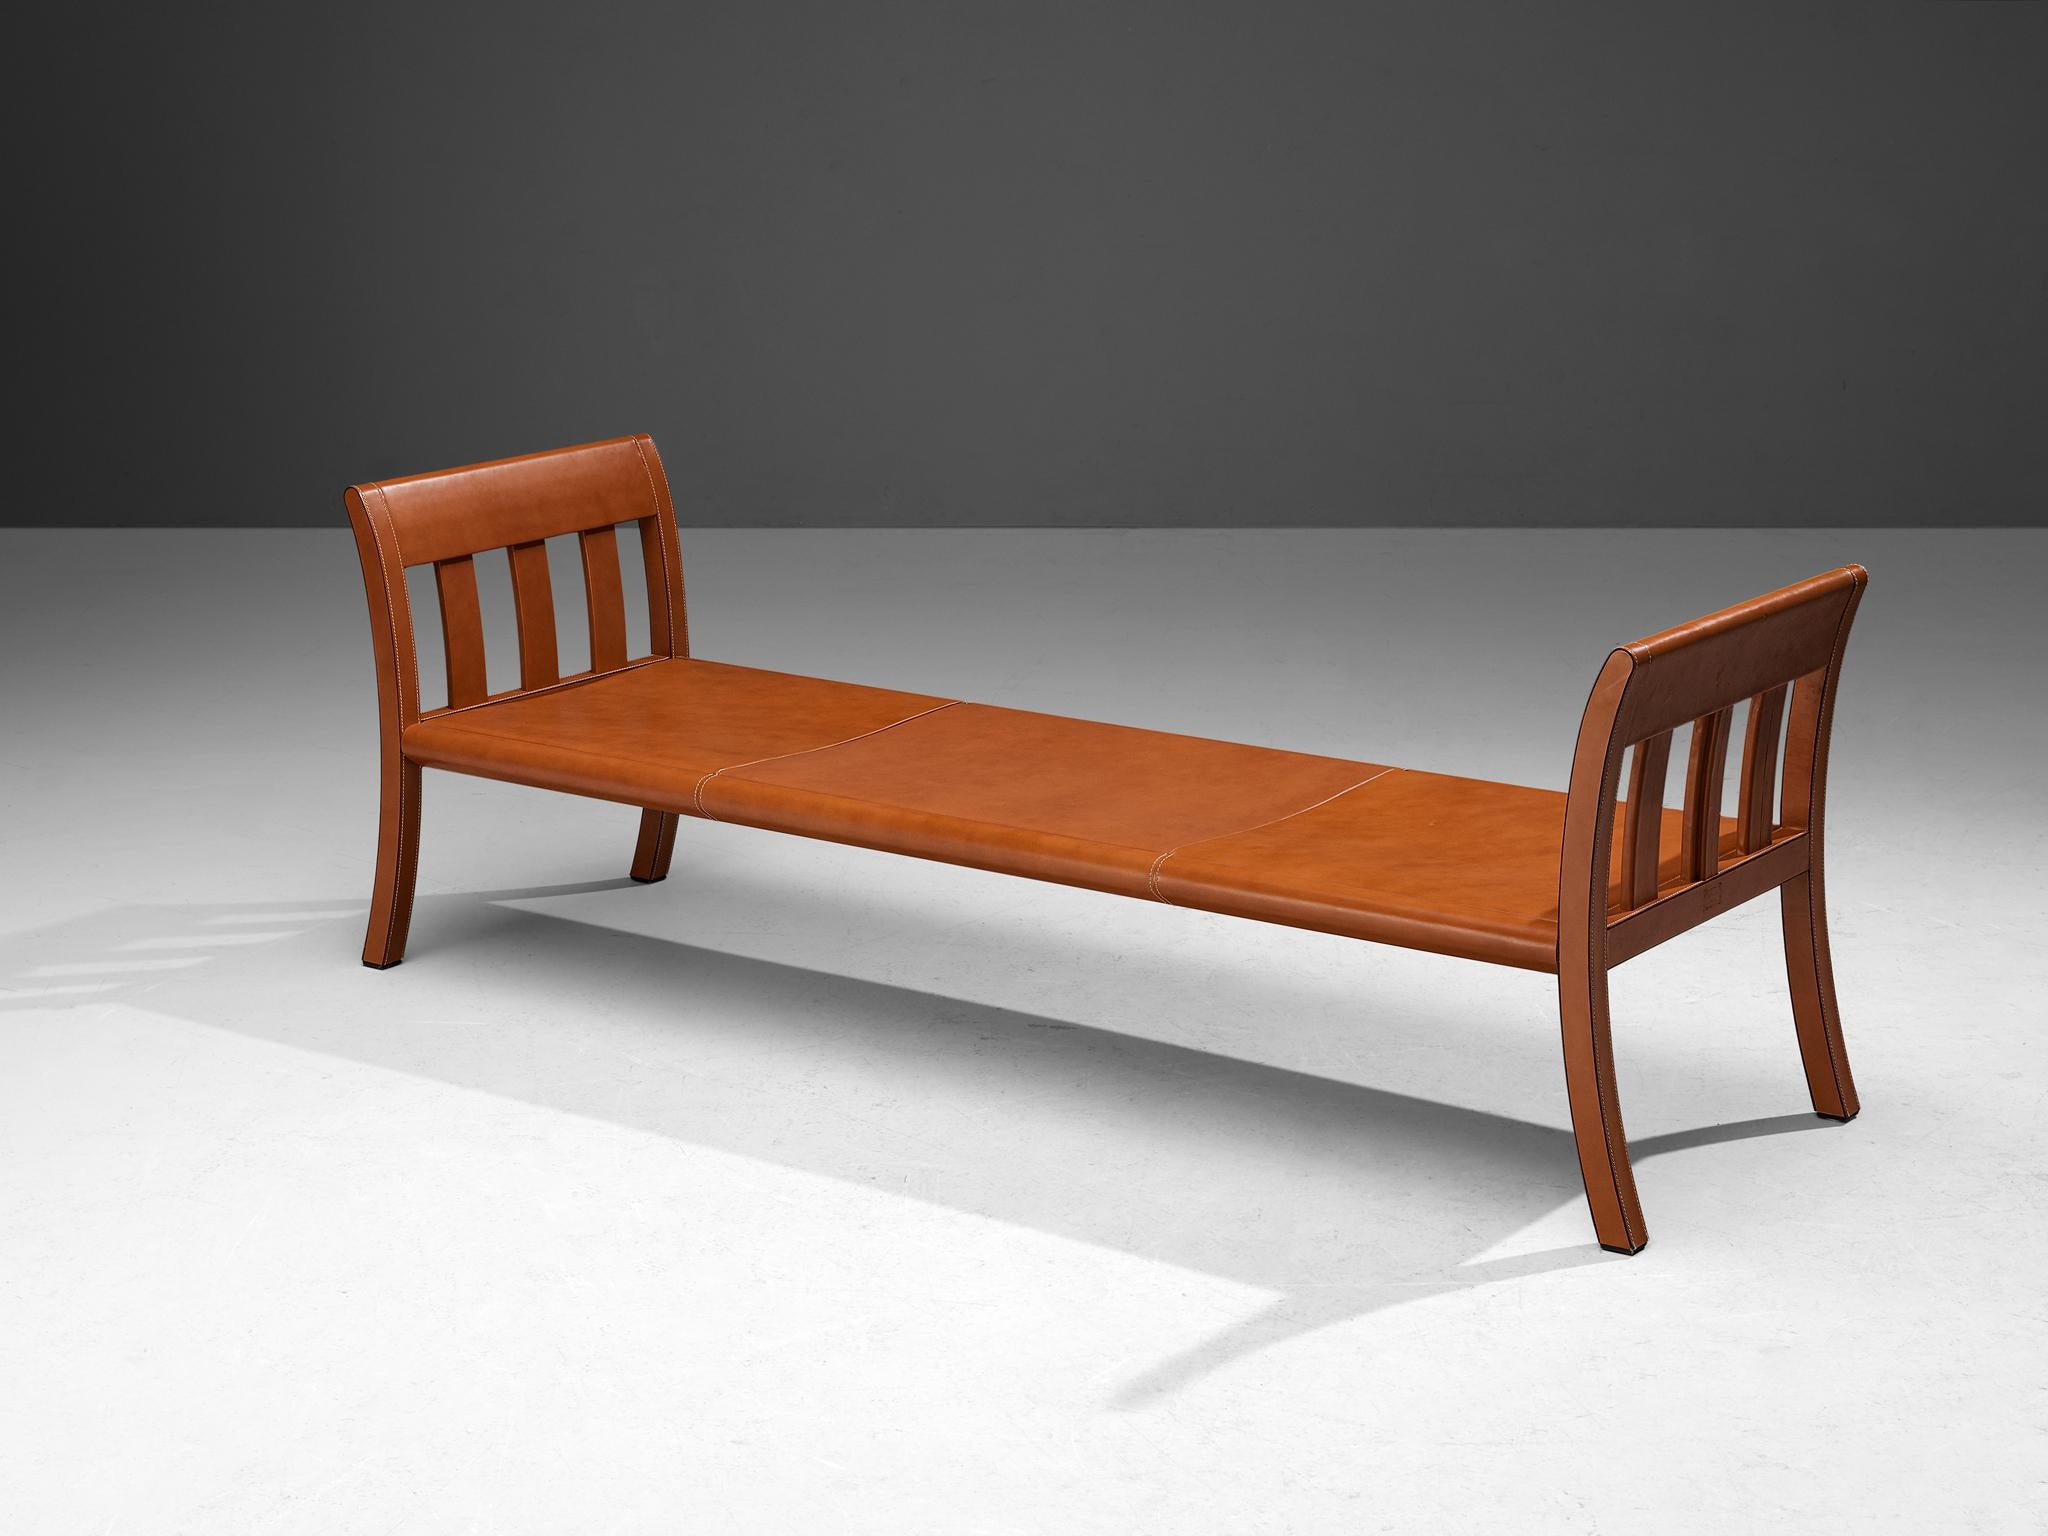 Michele De Lucchi e Silvia Suardi for Poltrona Frau, daybed part of the series 'Piazza di Spagna', leather, wood, Italy, production 2000-2009

This limited edition daybed is created by Italian architect and designer Michele De Lucchi in